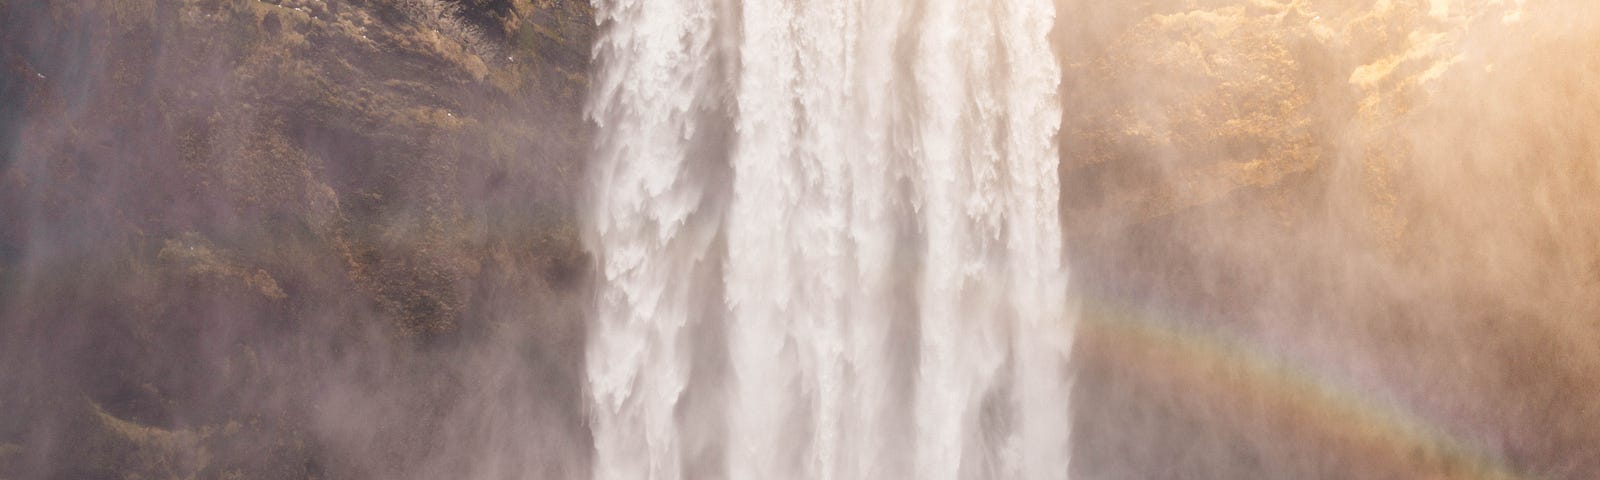 Person standing in awe of a large, beautiful waterfall.